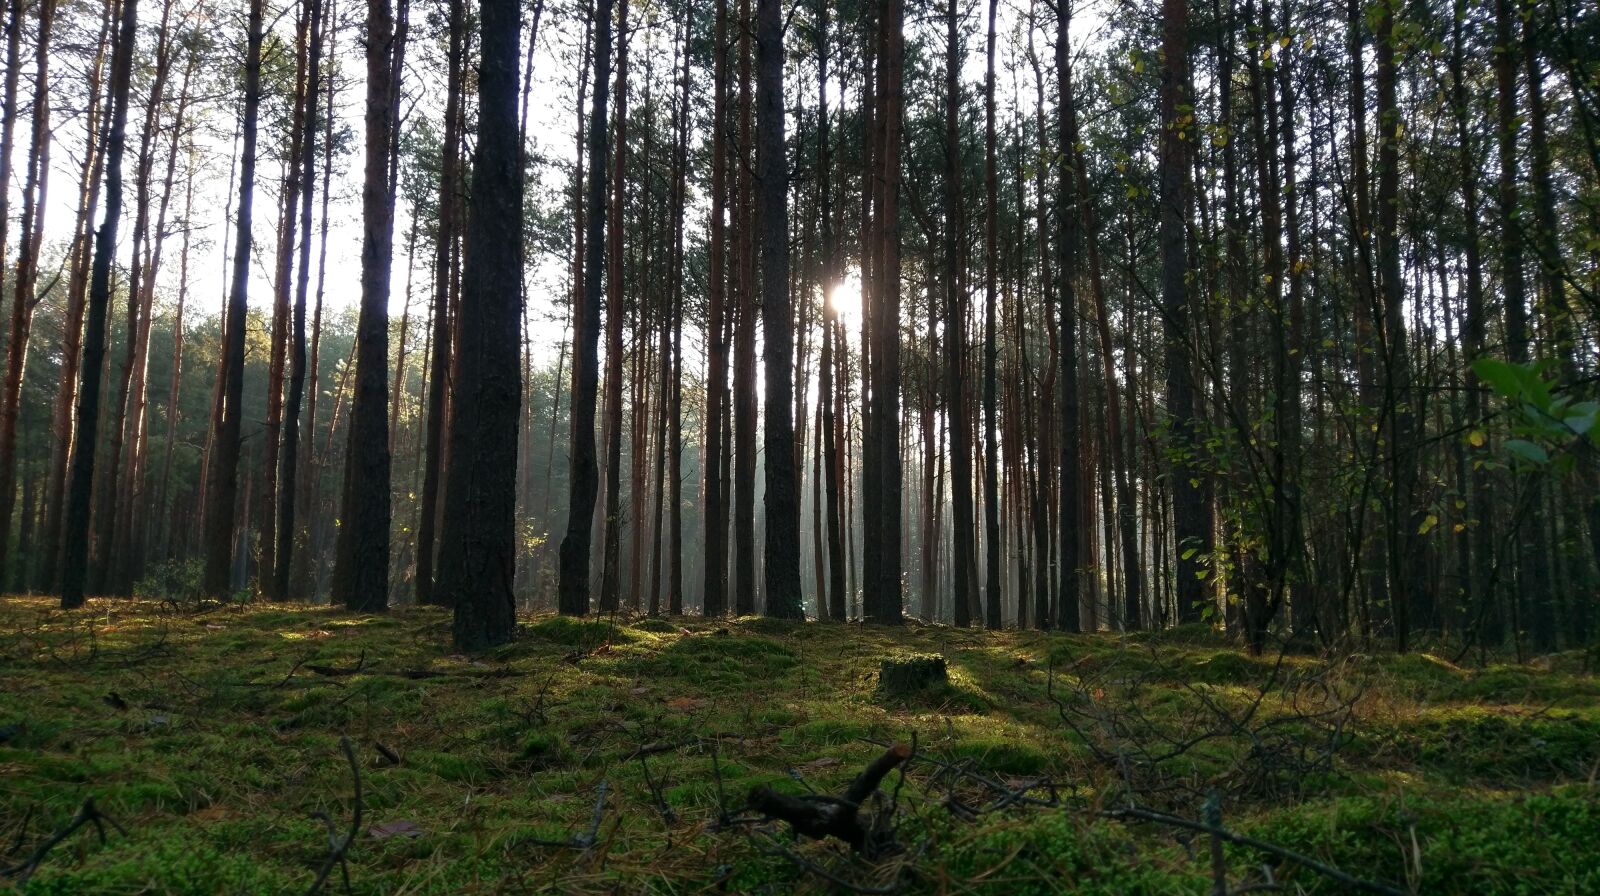 HTC 10 sample photo. Forest, green, forests photography